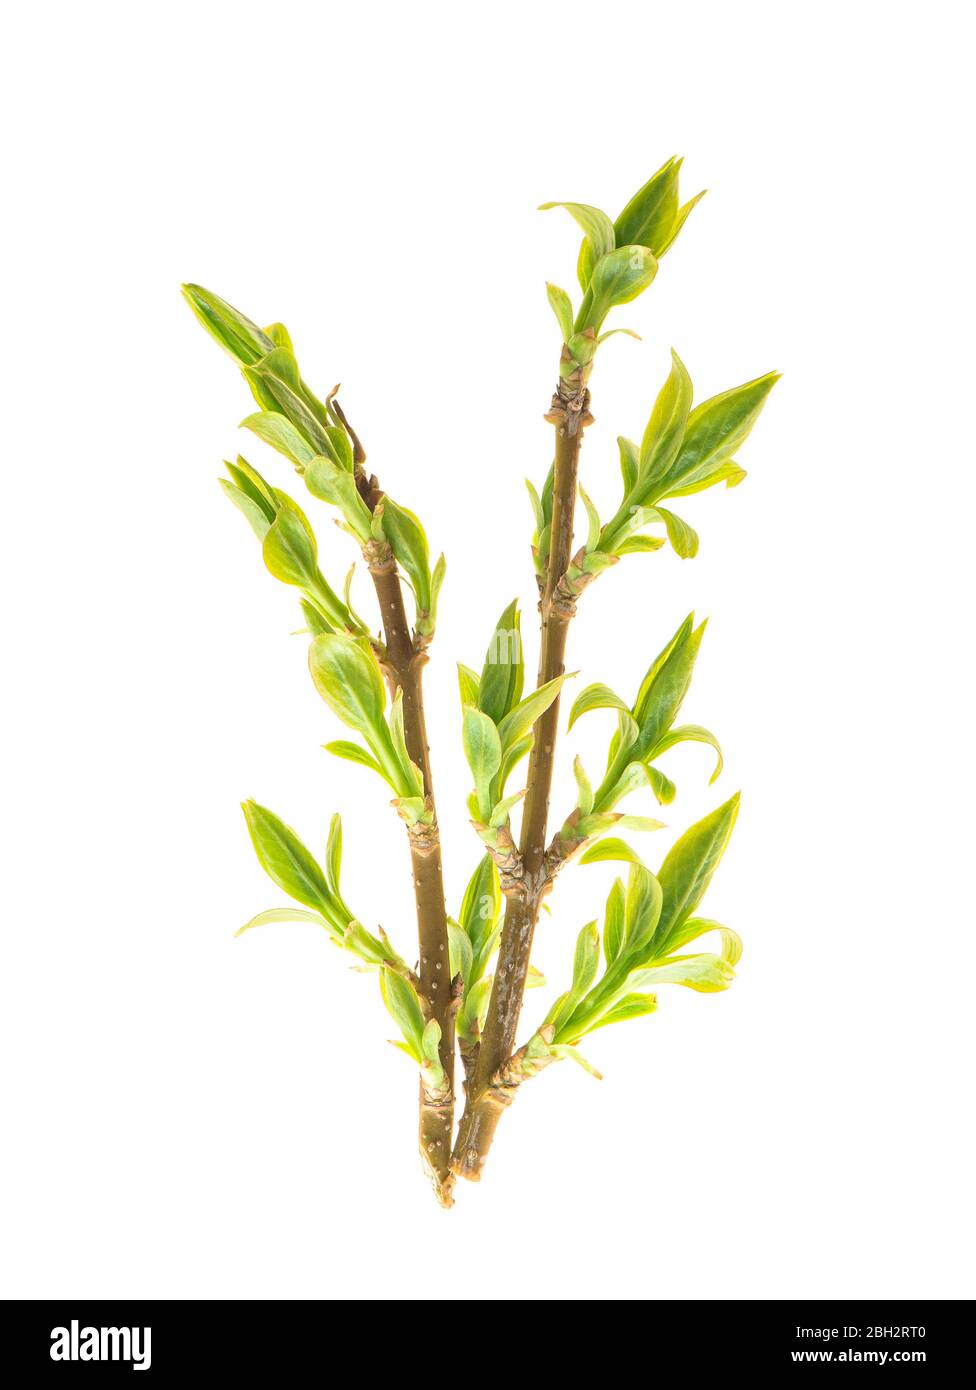 Youngforsythia plant twigs with green leaves isolated on white background Stock Photo